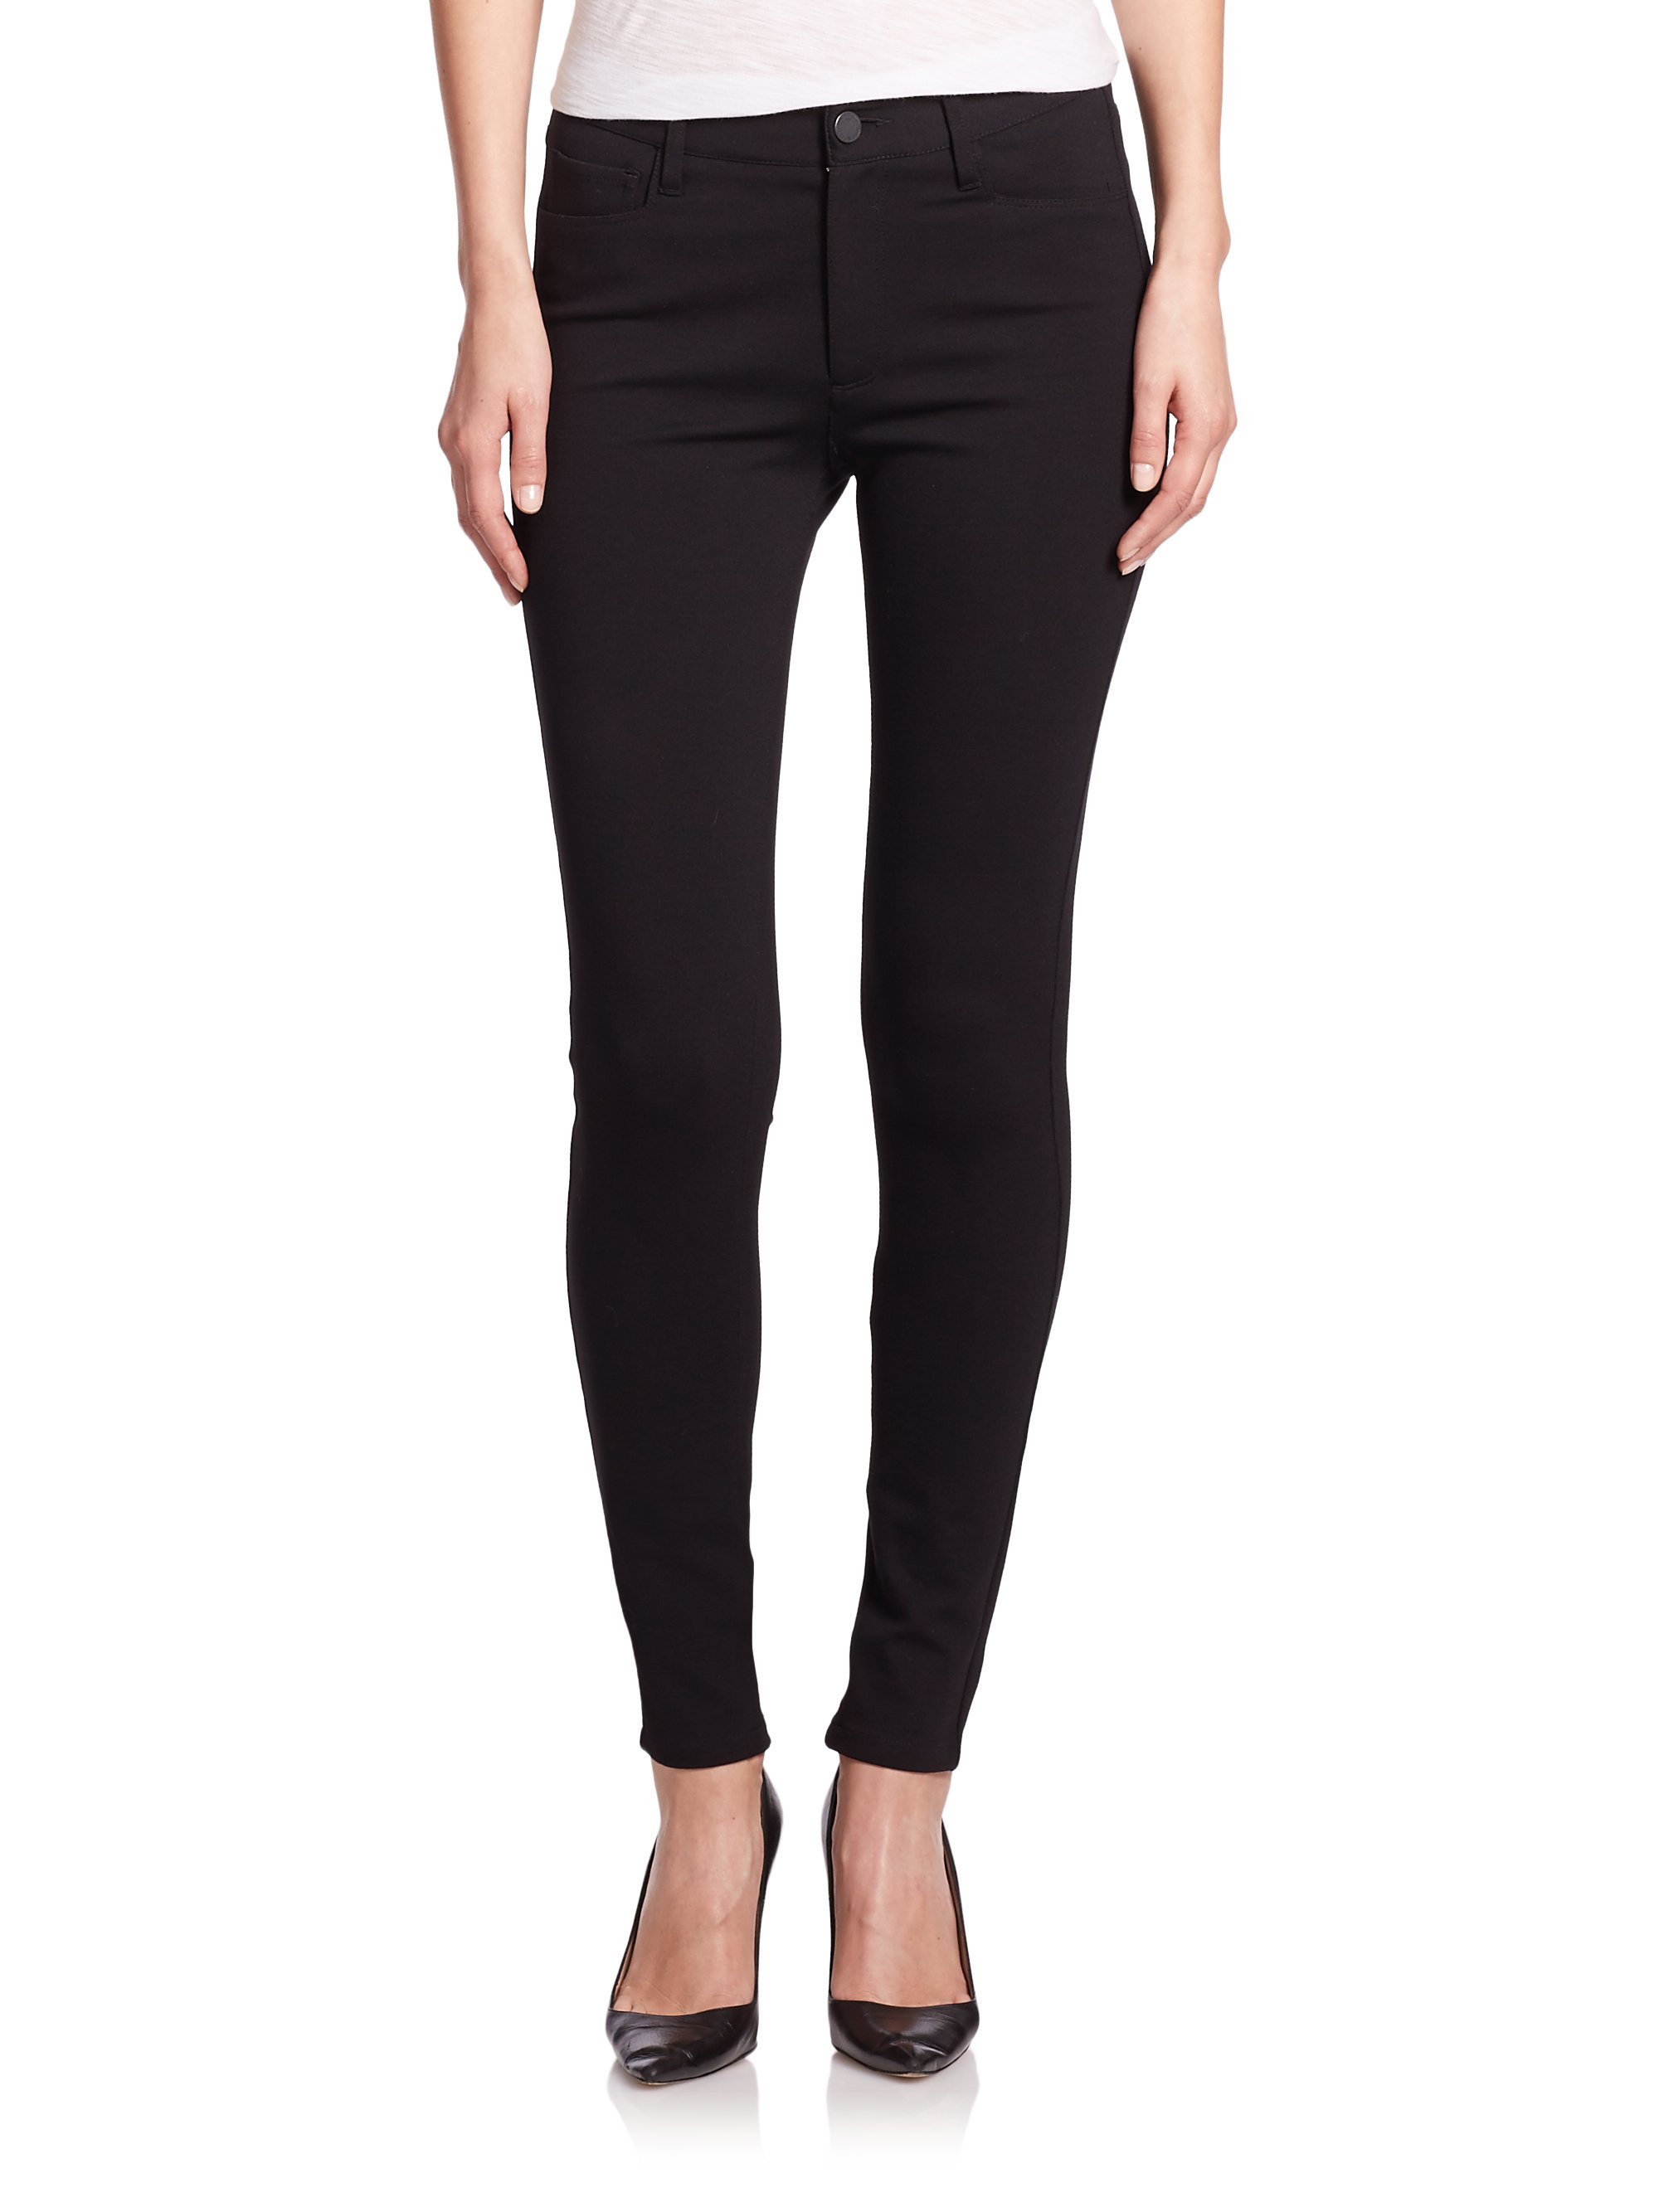 Lyst - Paige Millicent High-rise Ponte Pants in Black